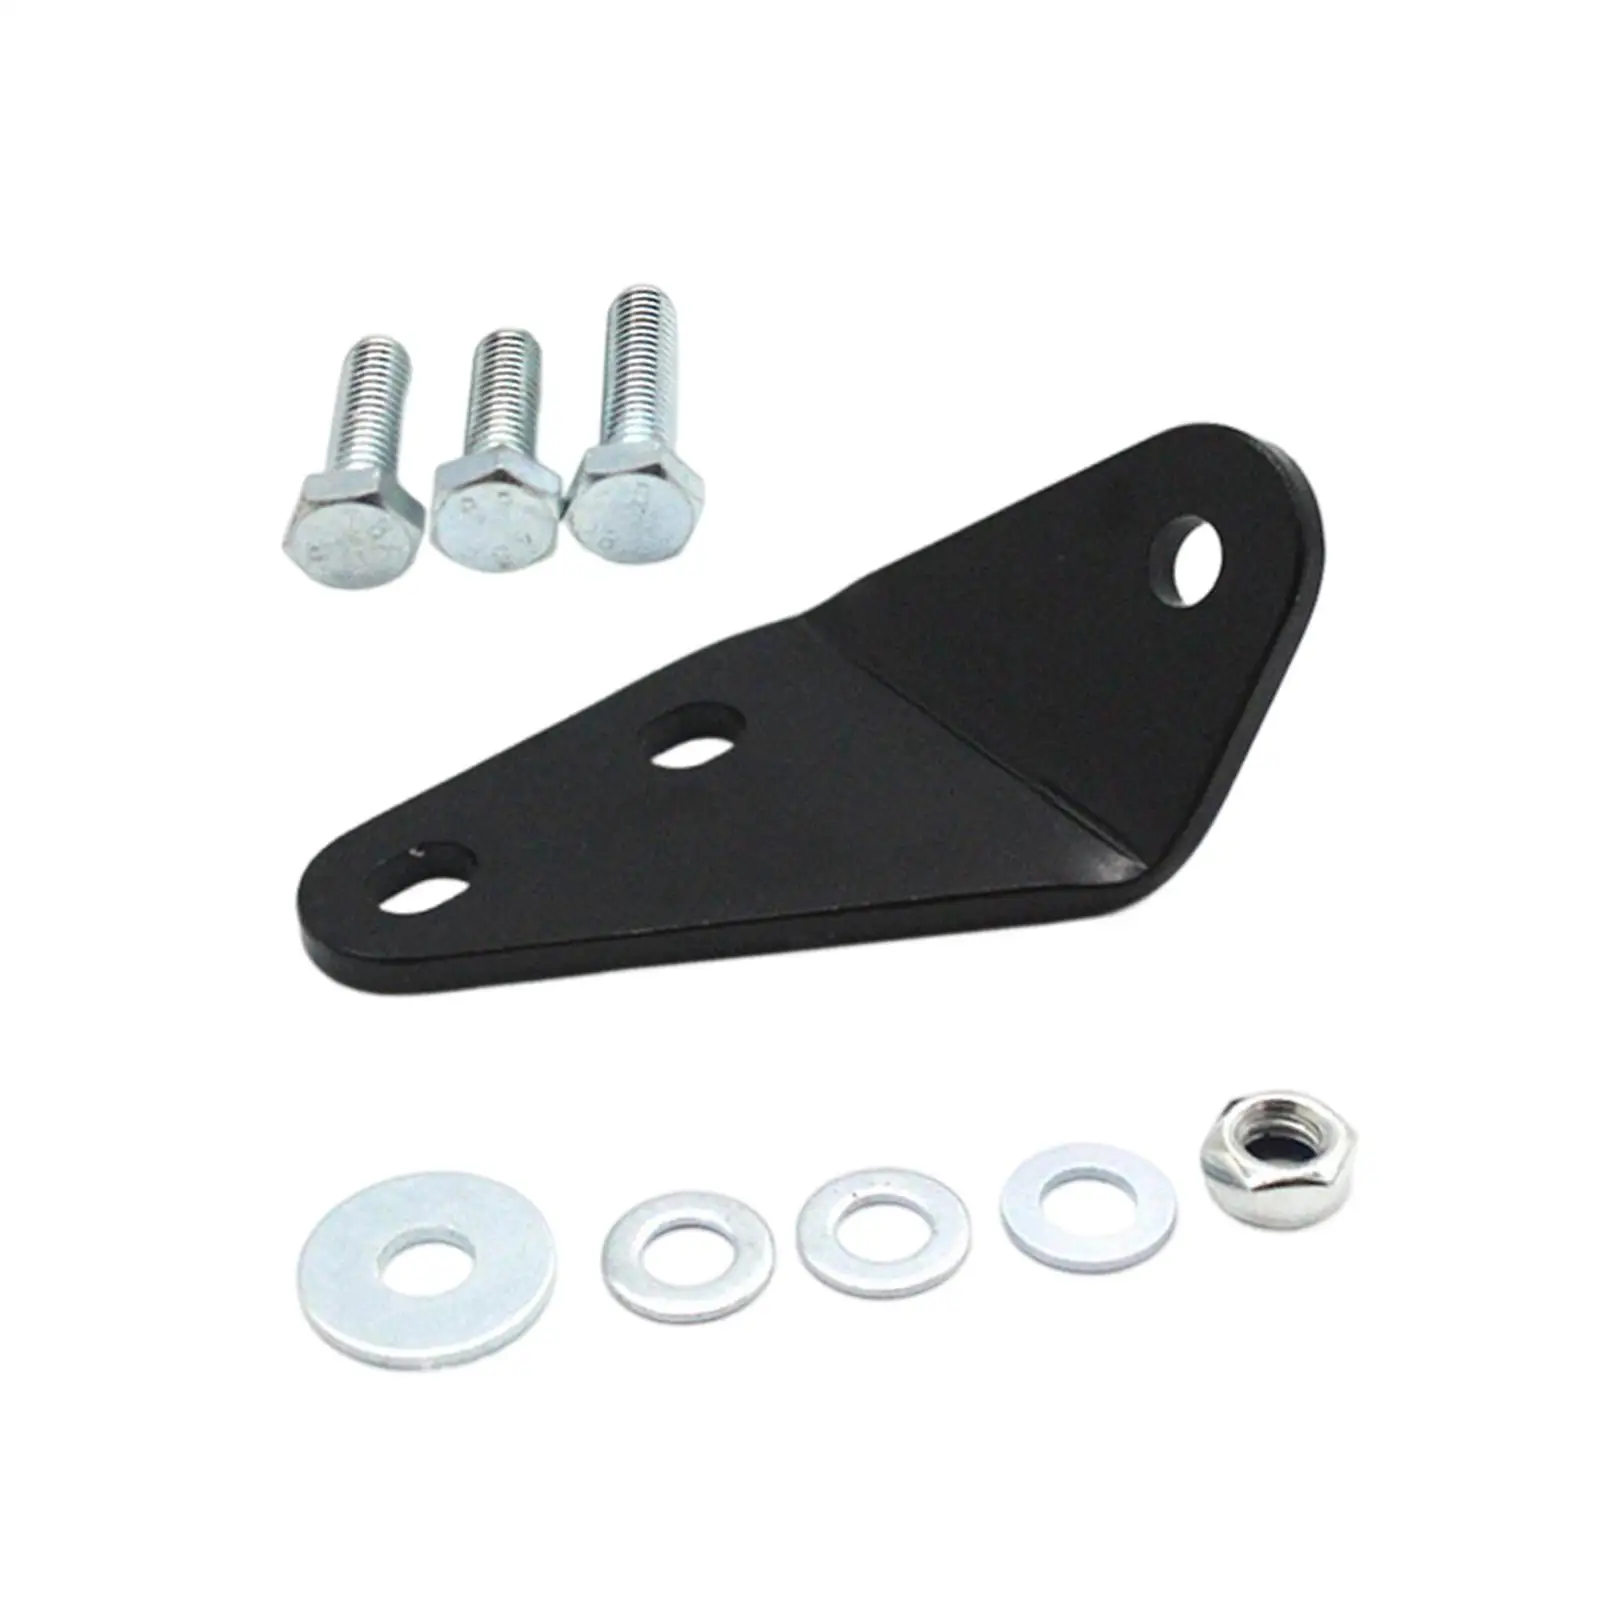 Clutch Pedal Repair Bracket Set Replacement Parts for VW T4 Transporter